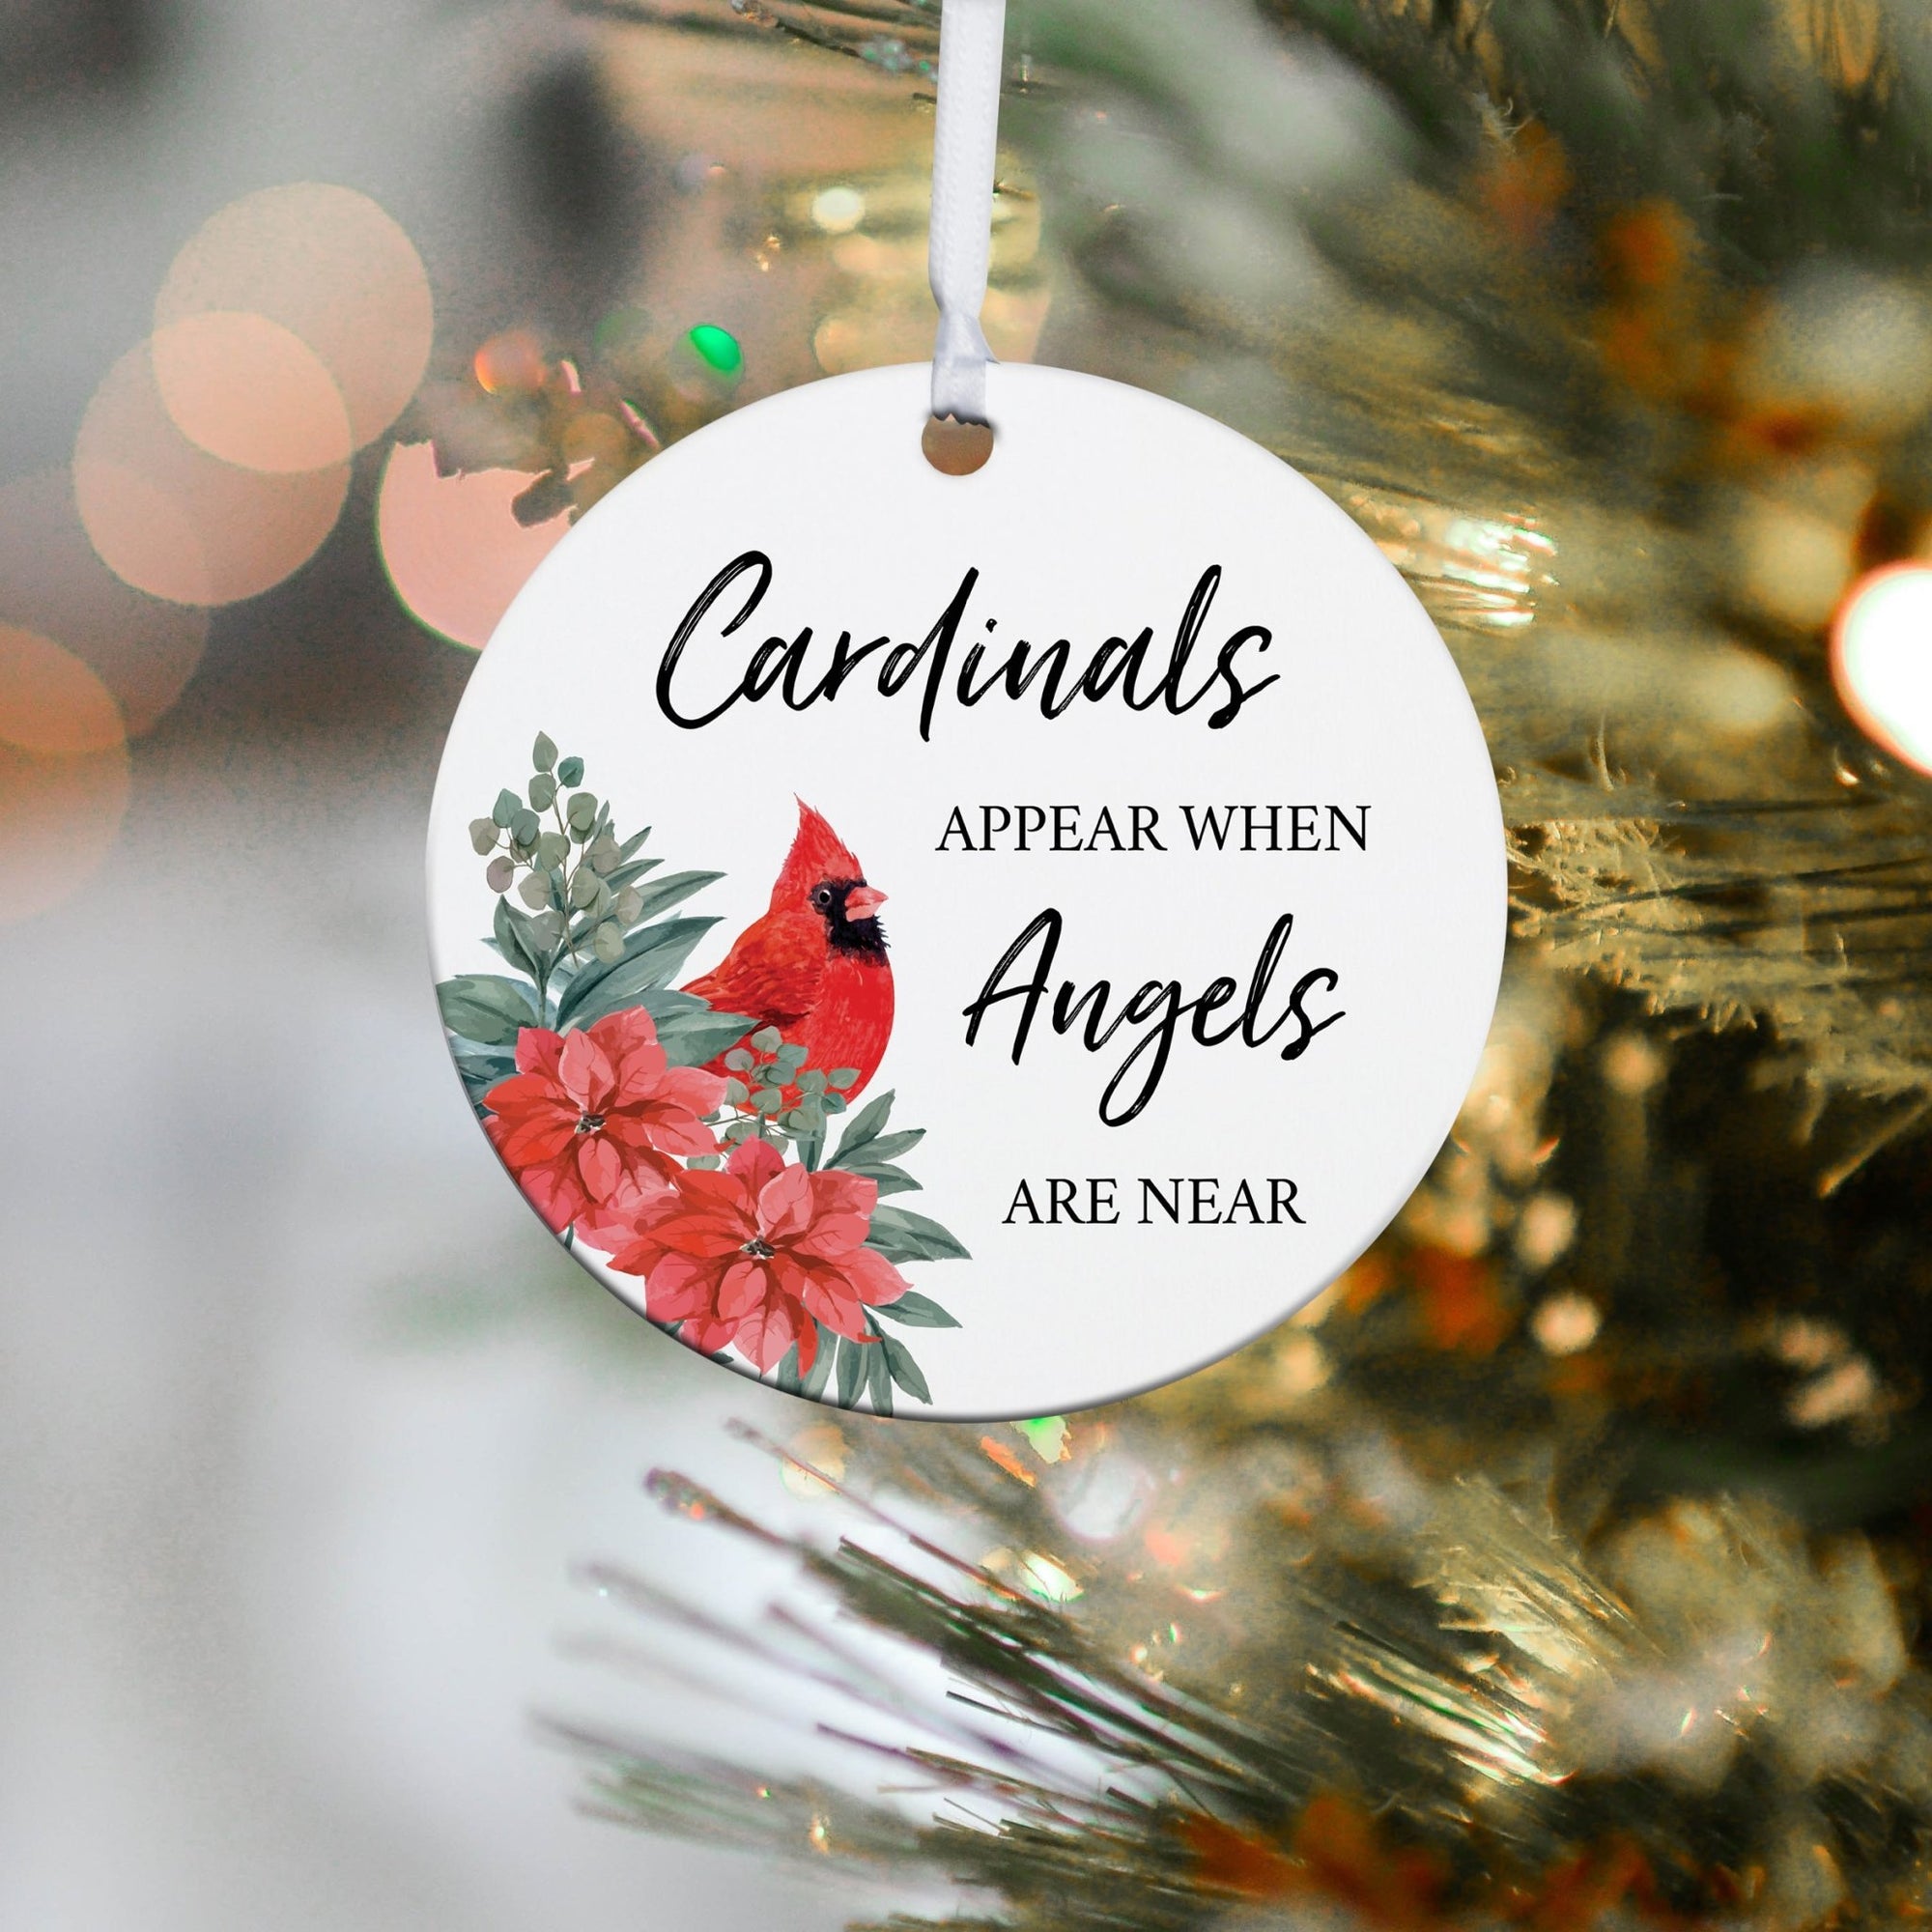 Christmas ornament gift memorial decorations for a heartfelt and thoughtful holiday tribute.